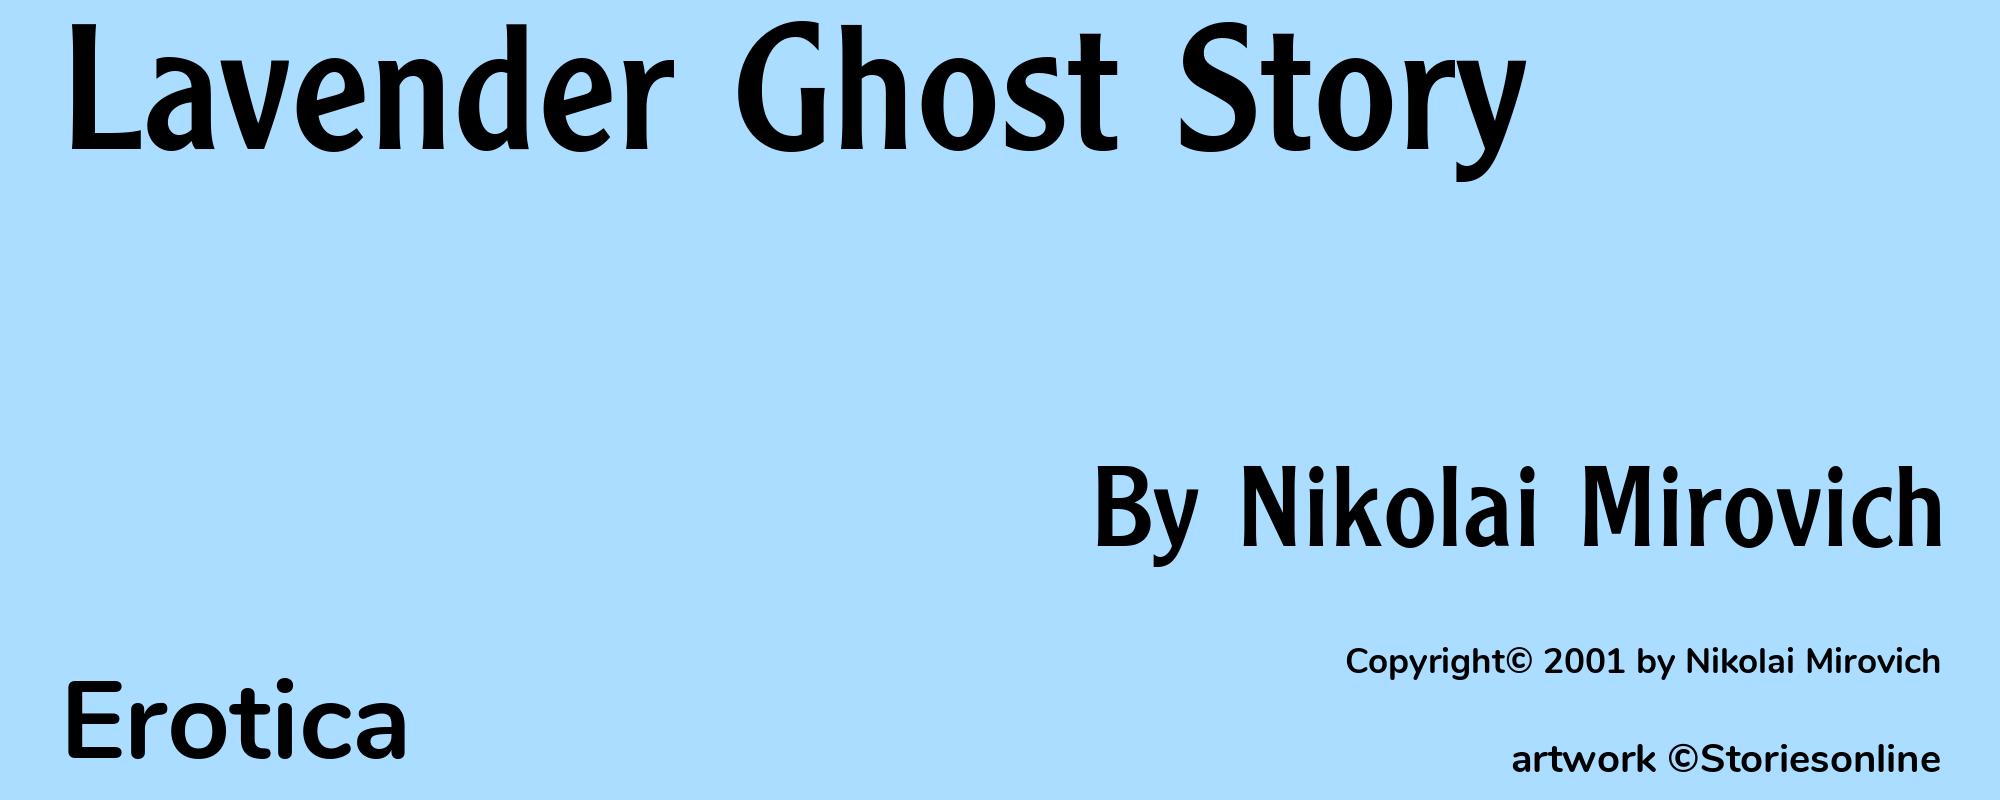 Lavender Ghost Story - Cover